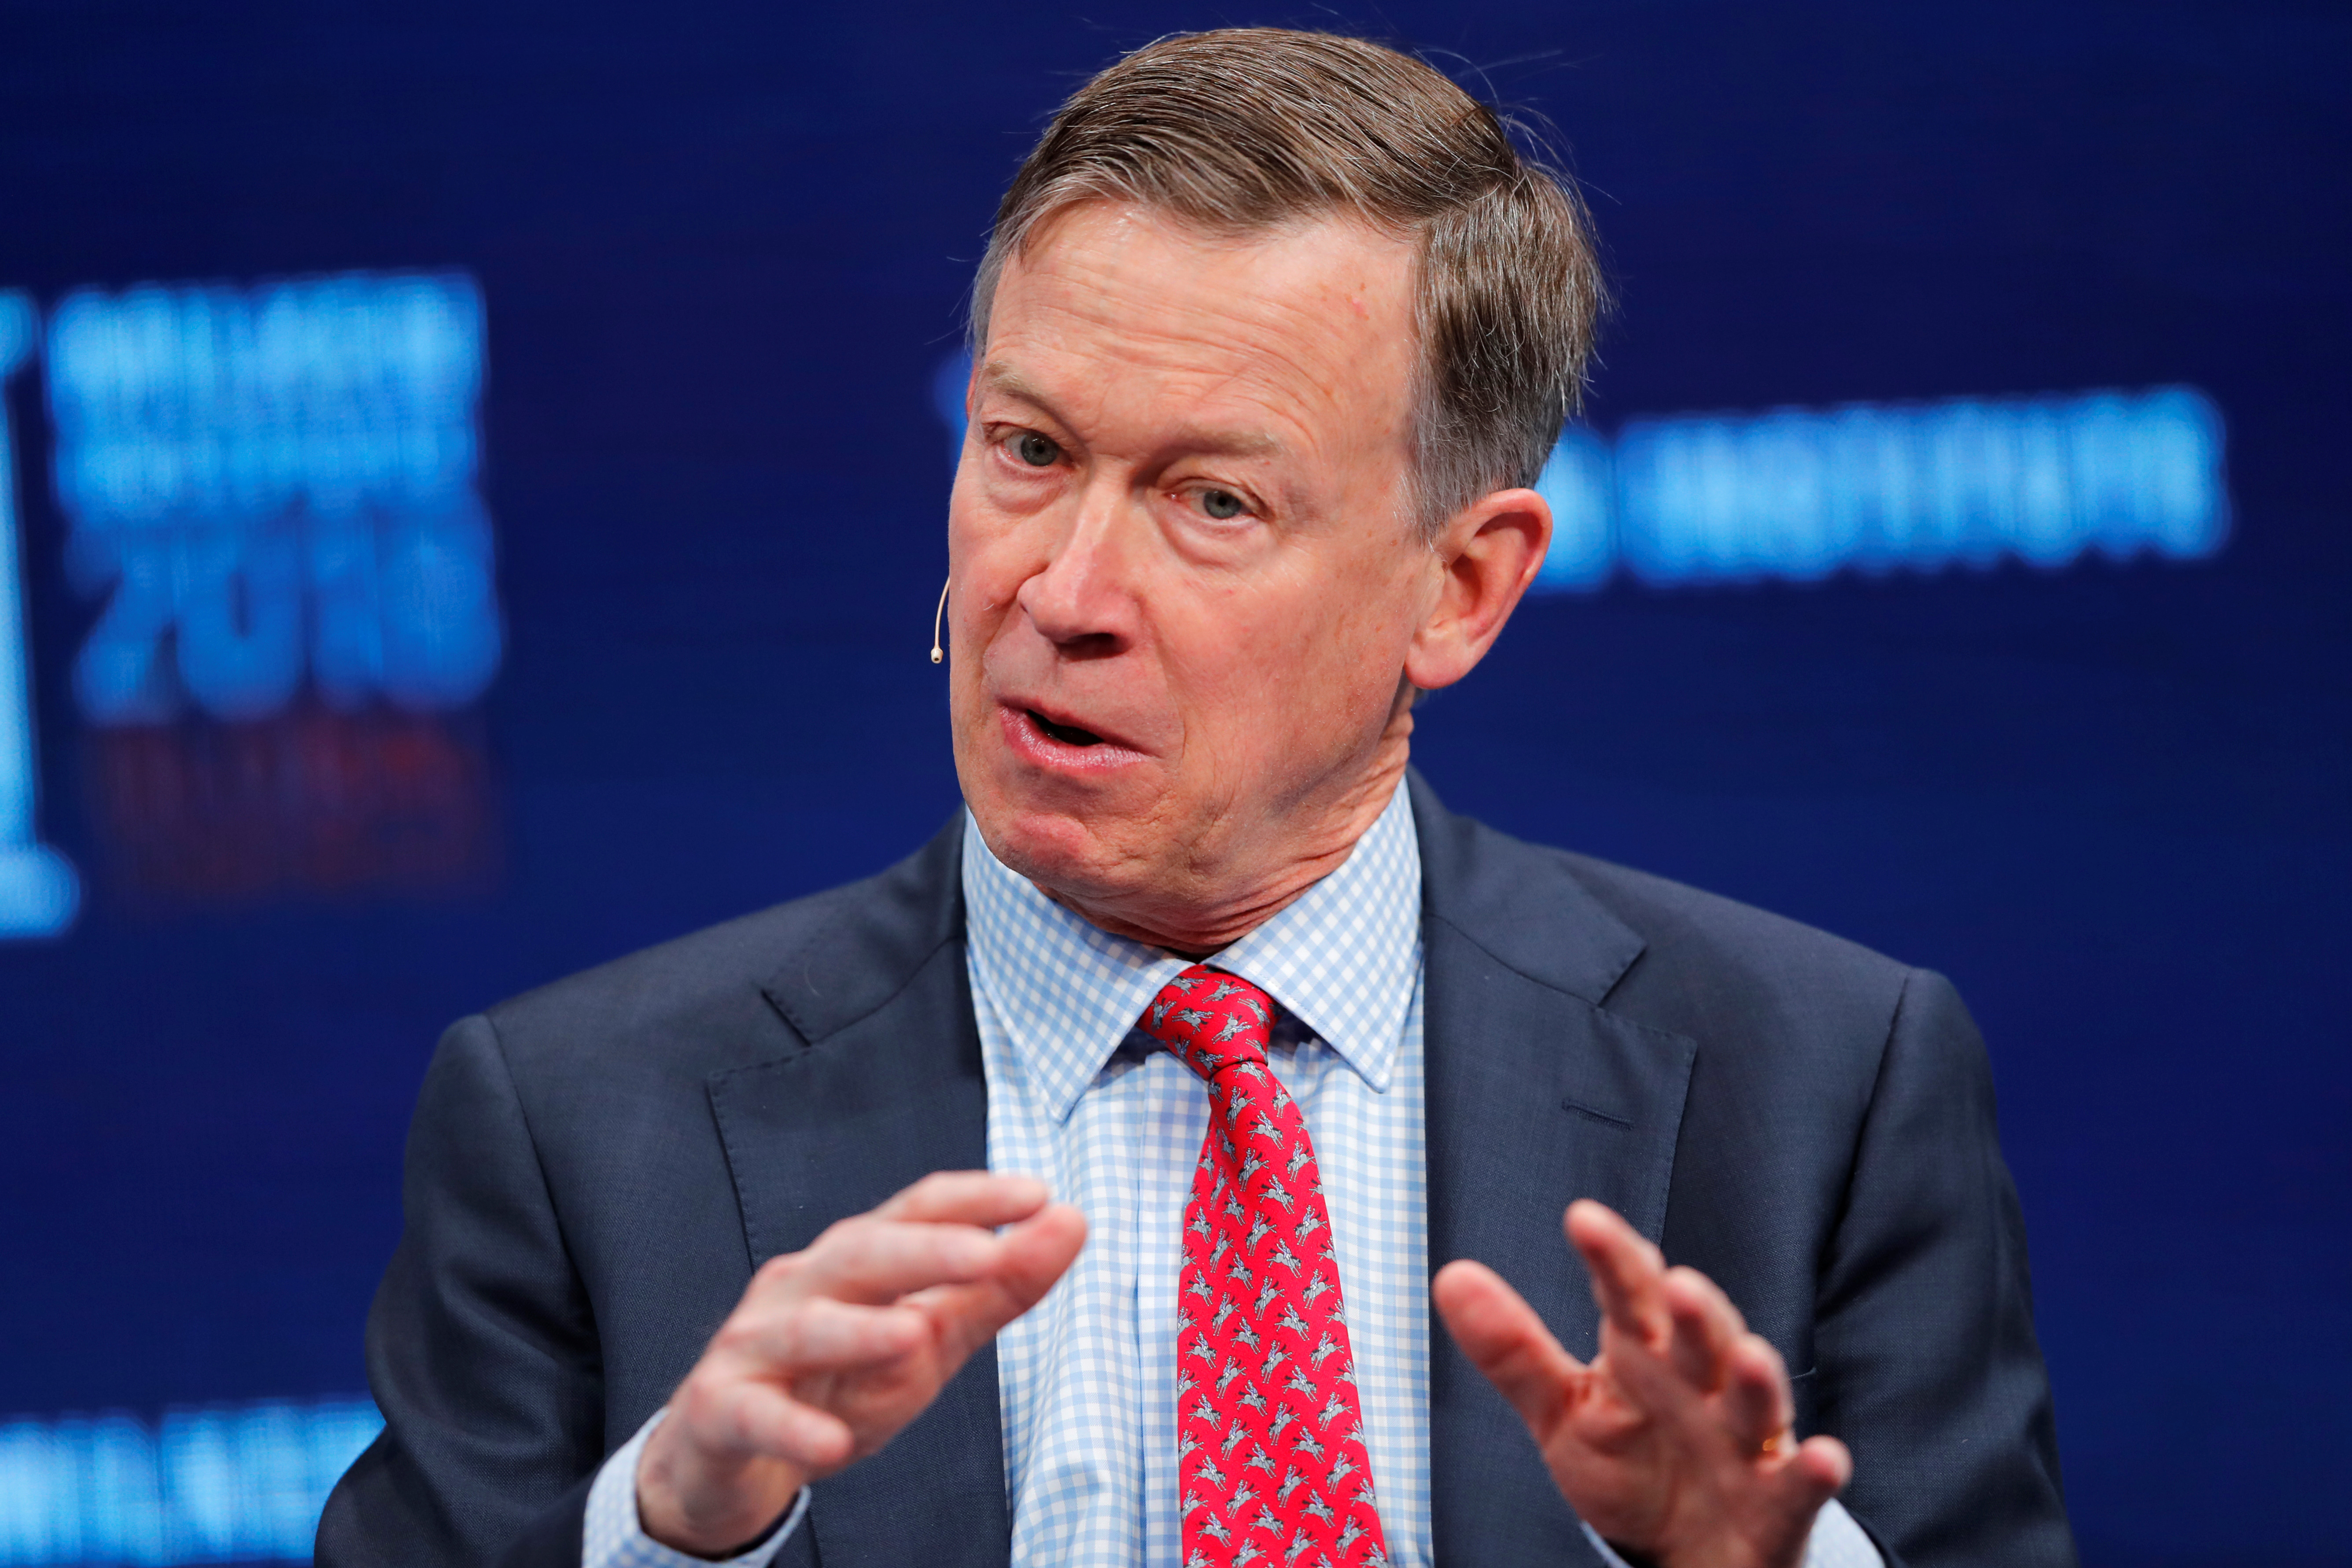 John Hickenlooper Governor, Colorado speaks at the Milken Institute 21st Global Conference in Beverly Hills, California